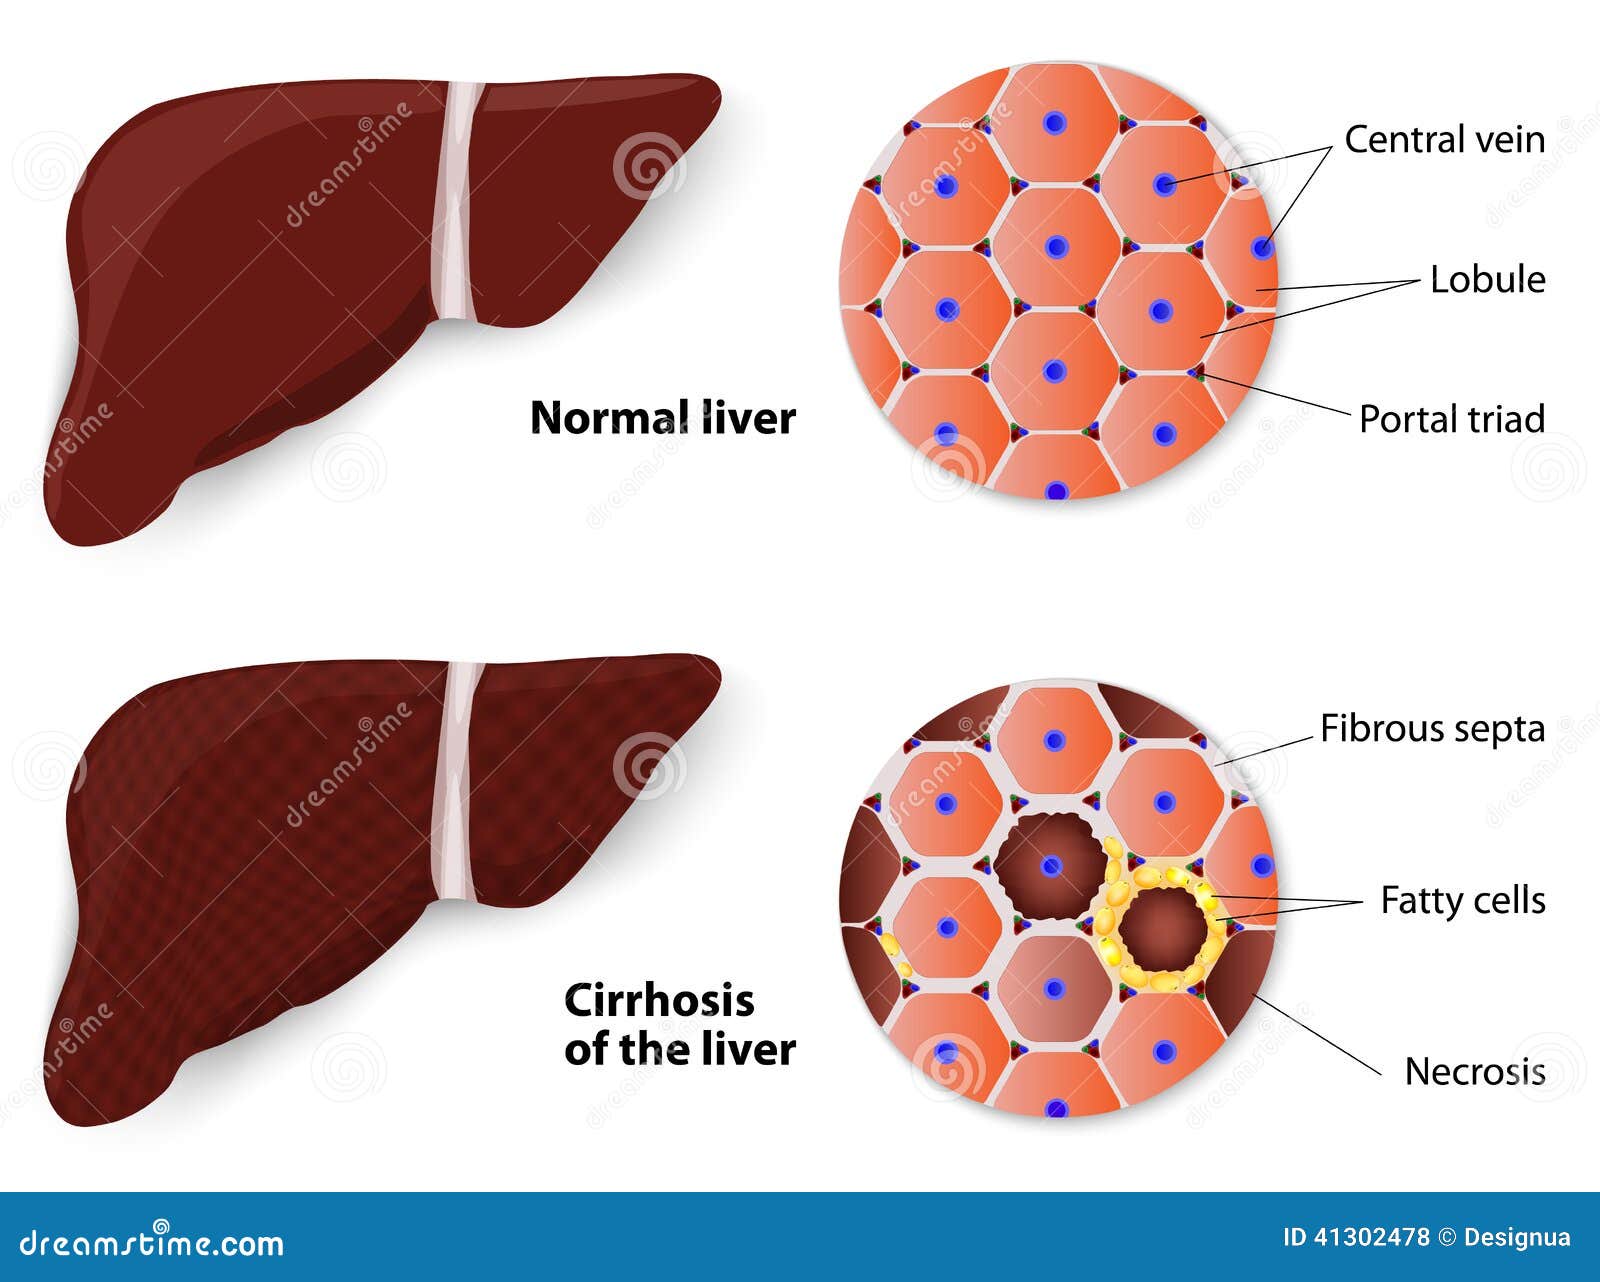 Healthy Liver And Cirrhosis Stock Vector Image 41302478